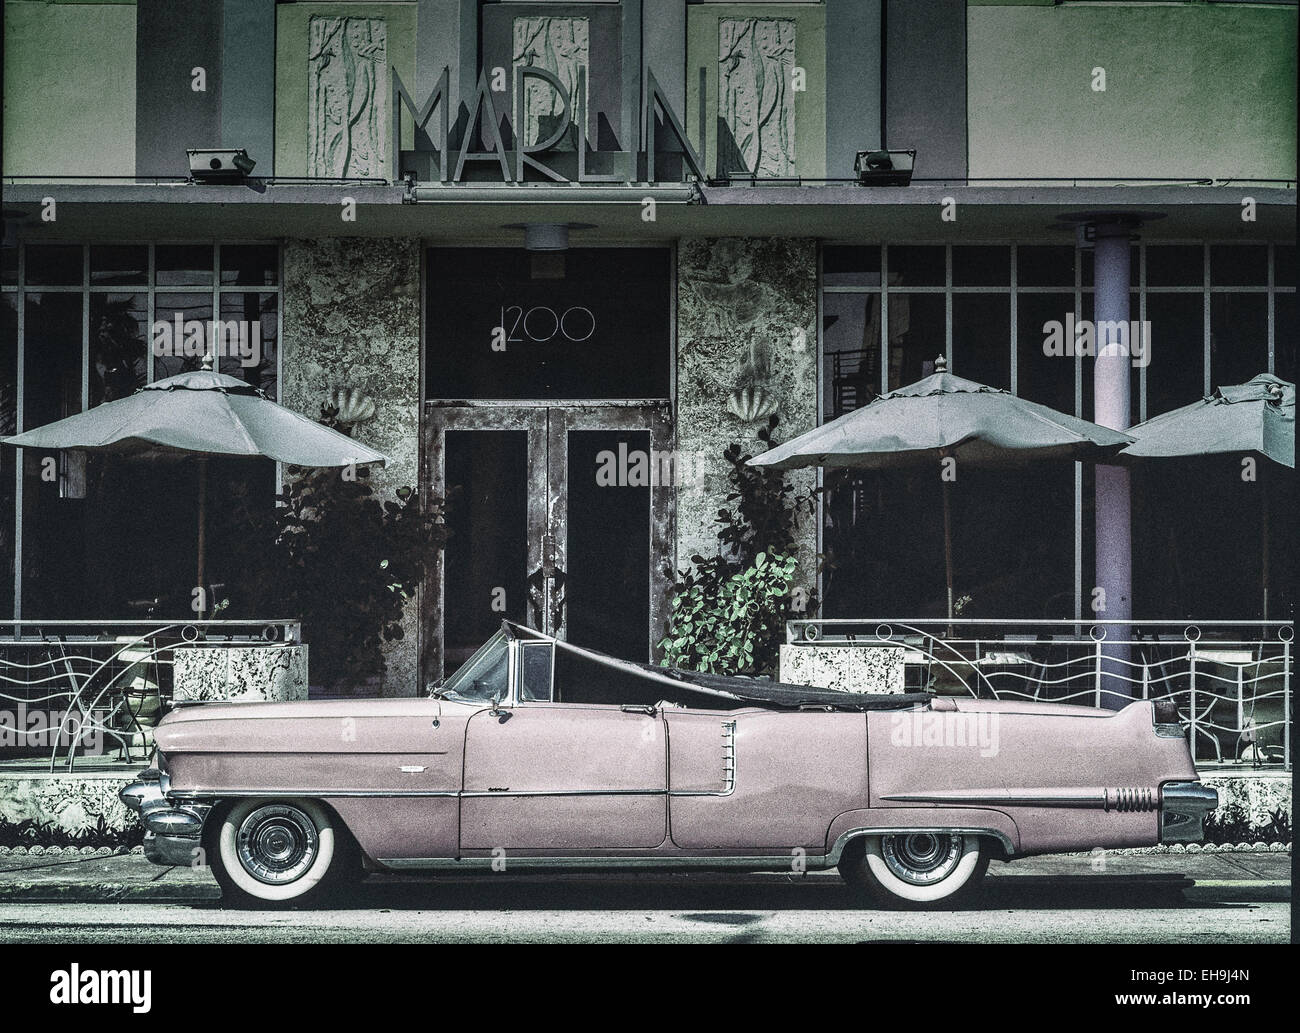 1956 Cadillac convertible parked outside hotel in Miami Stock Photo